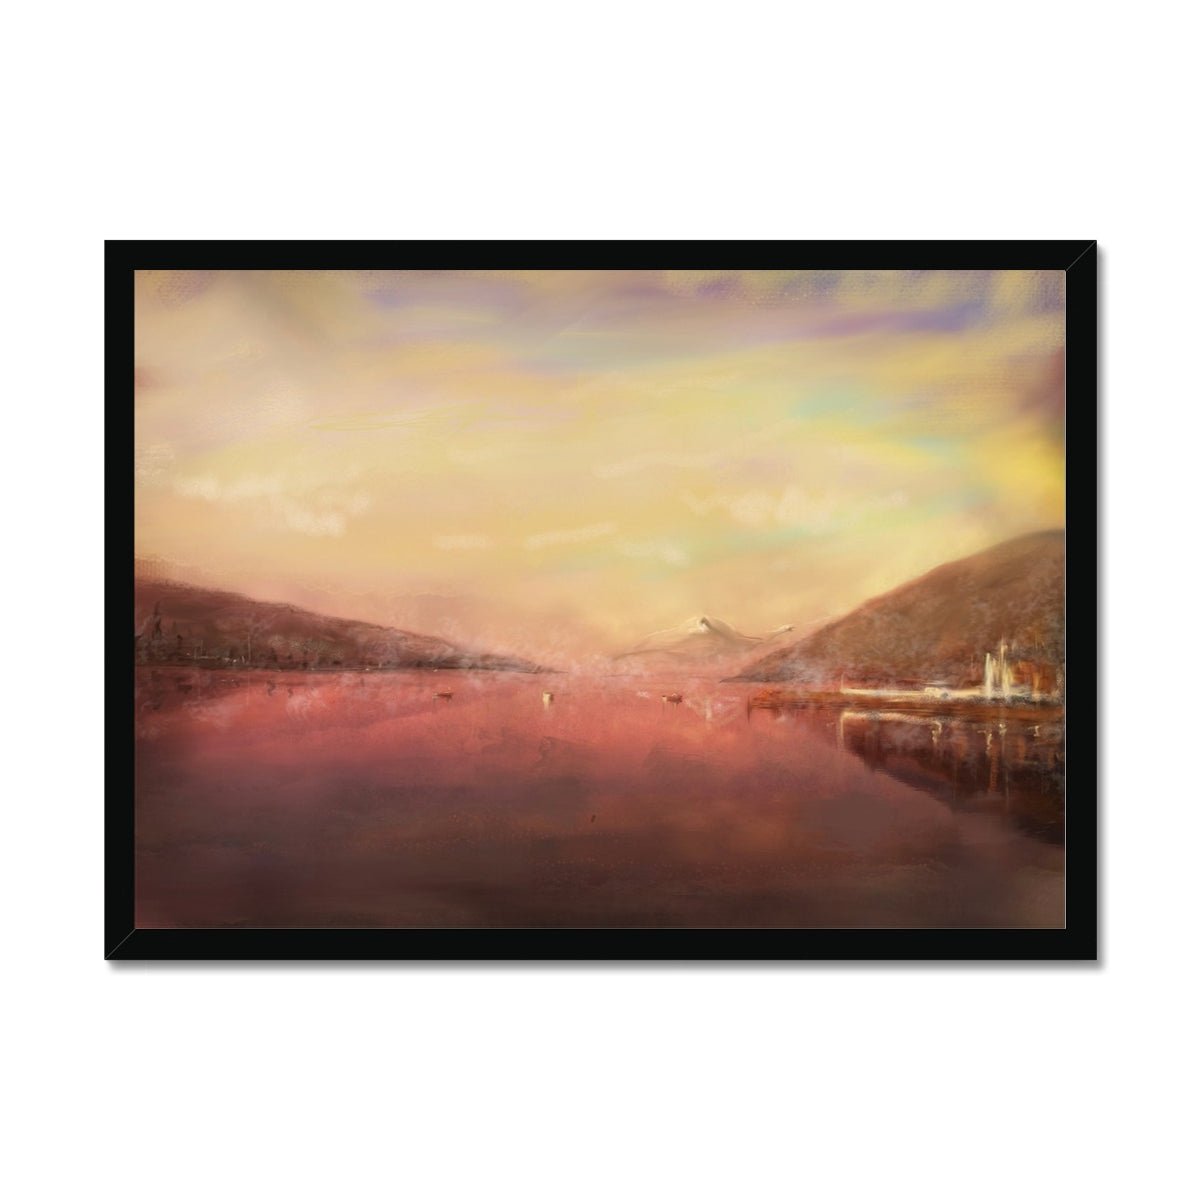 Loch Tay Painting | Framed Prints From Scotland-Framed Prints-Scottish Lochs & Mountains Art Gallery-A2 Landscape-Black Frame-Paintings, Prints, Homeware, Art Gifts From Scotland By Scottish Artist Kevin Hunter